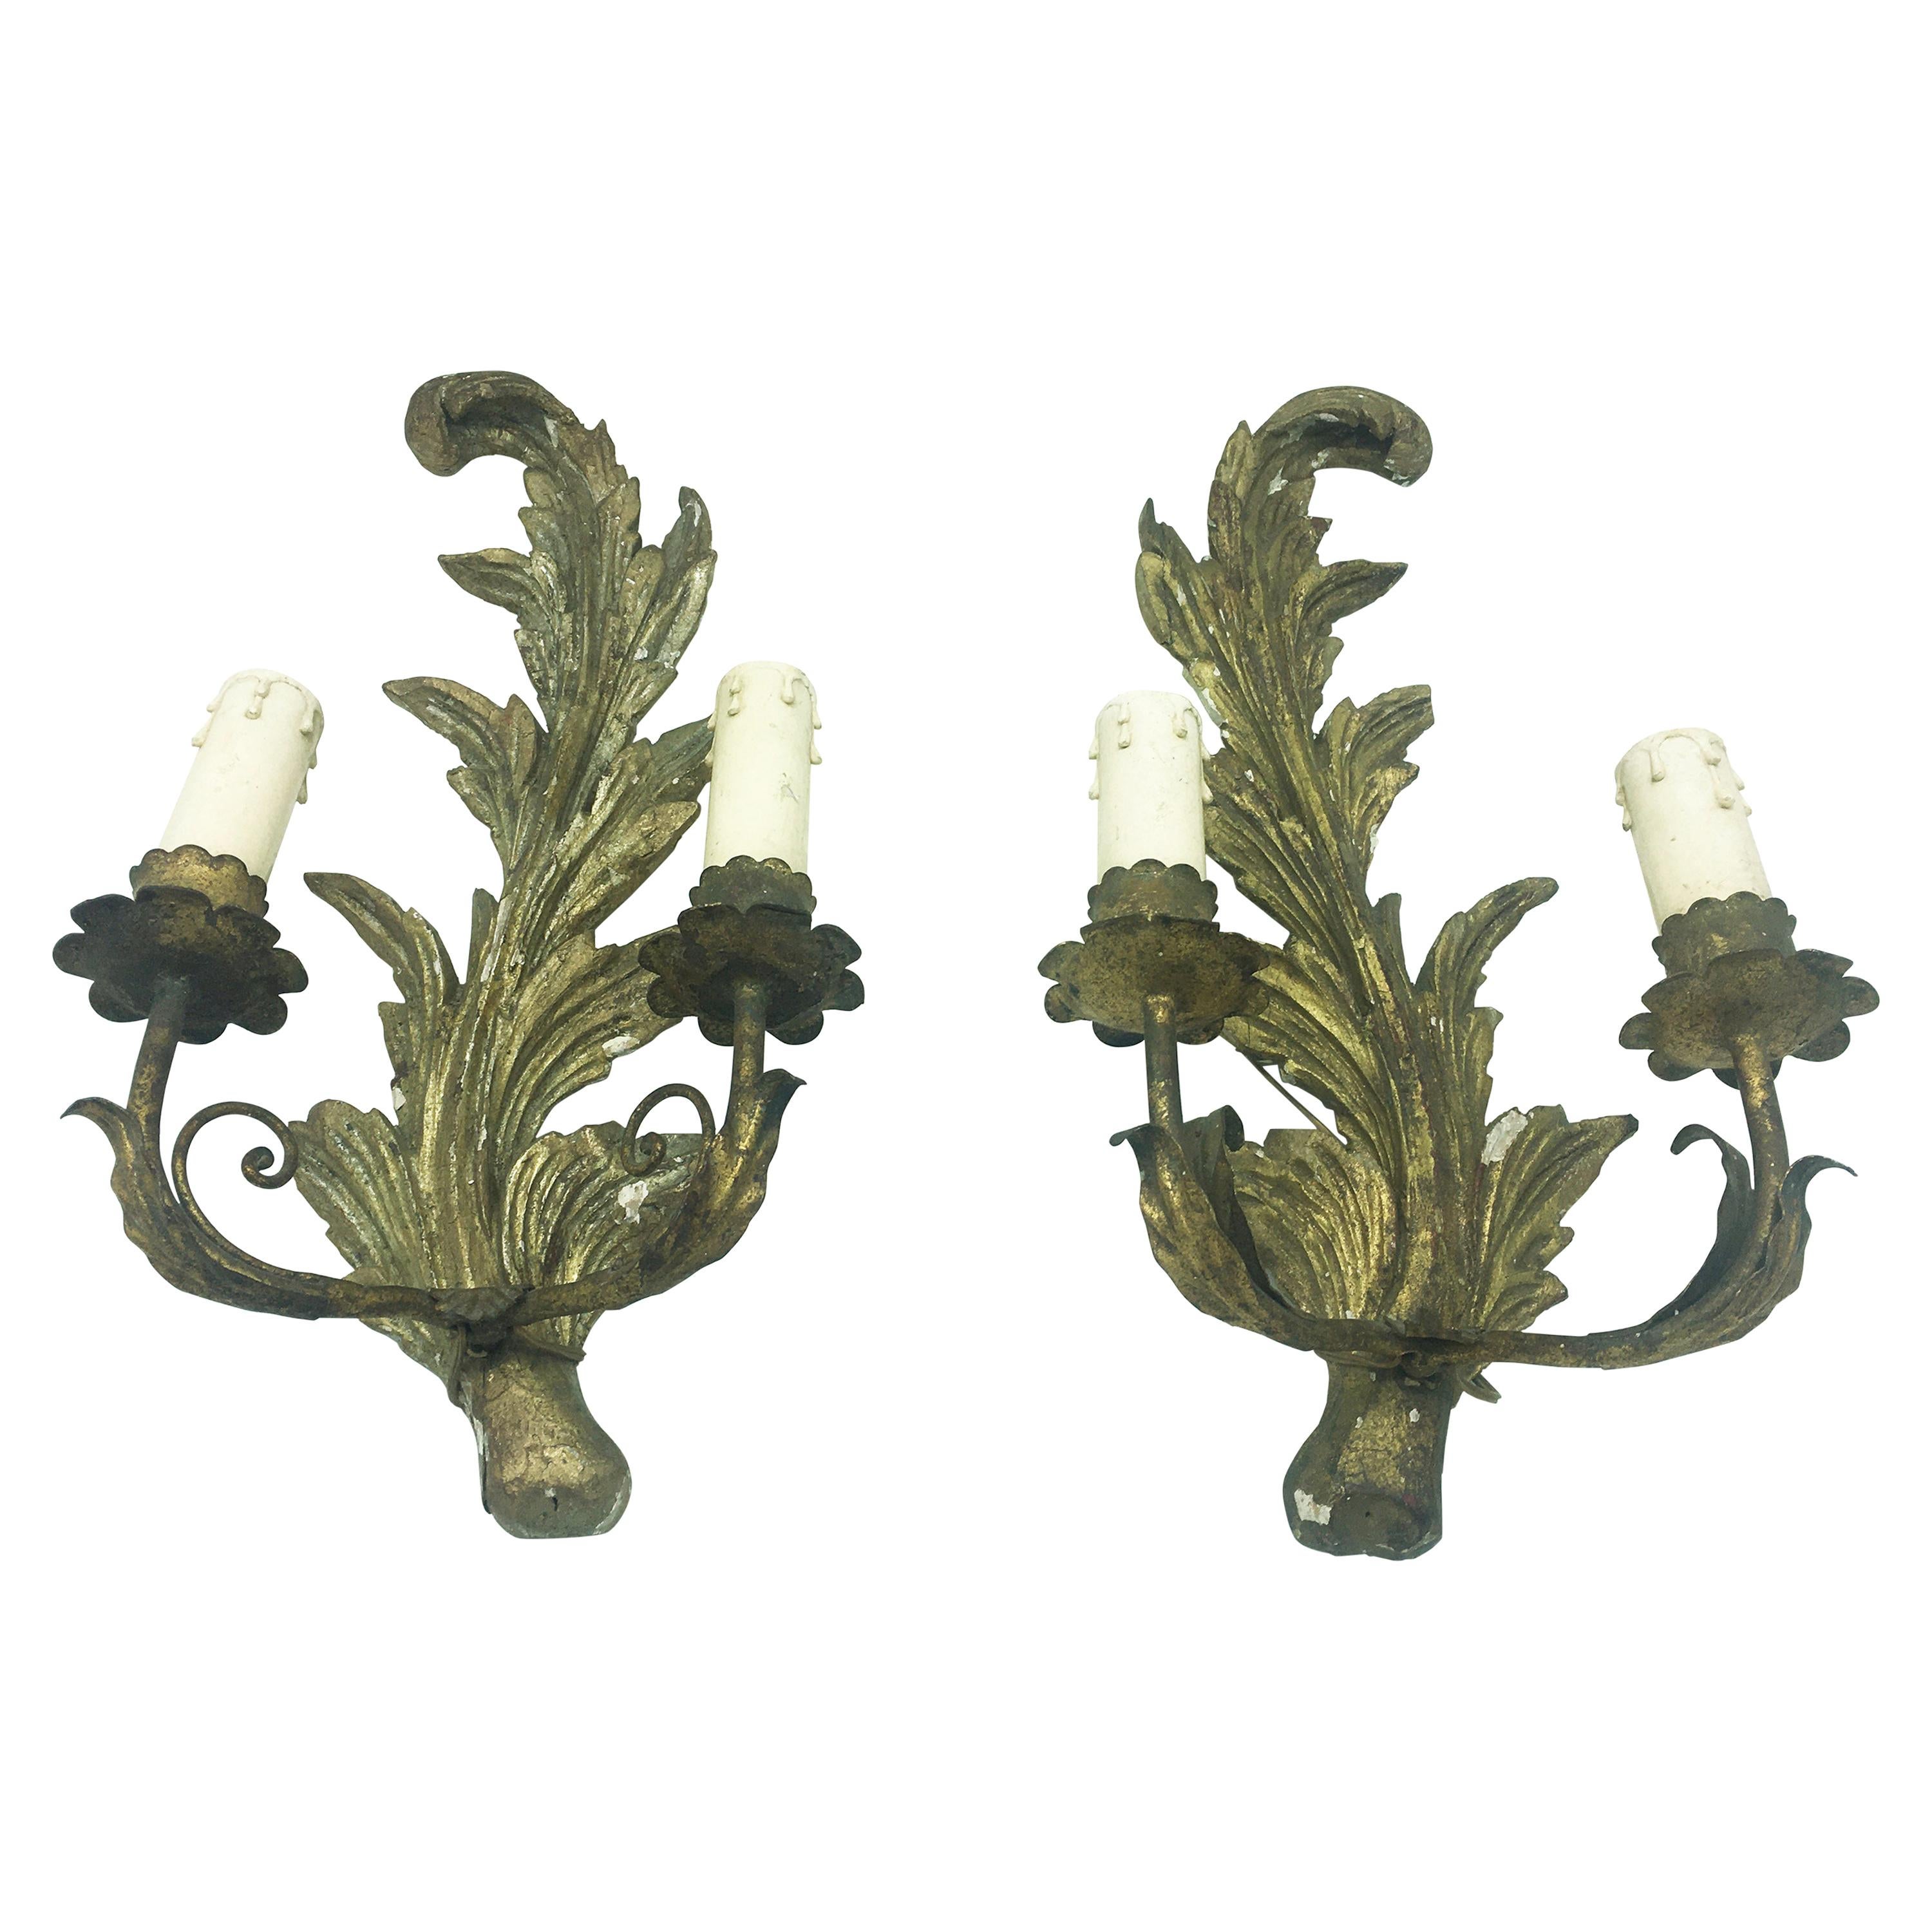 Exceptional Pair of Italian Giltwood Wall Appliques